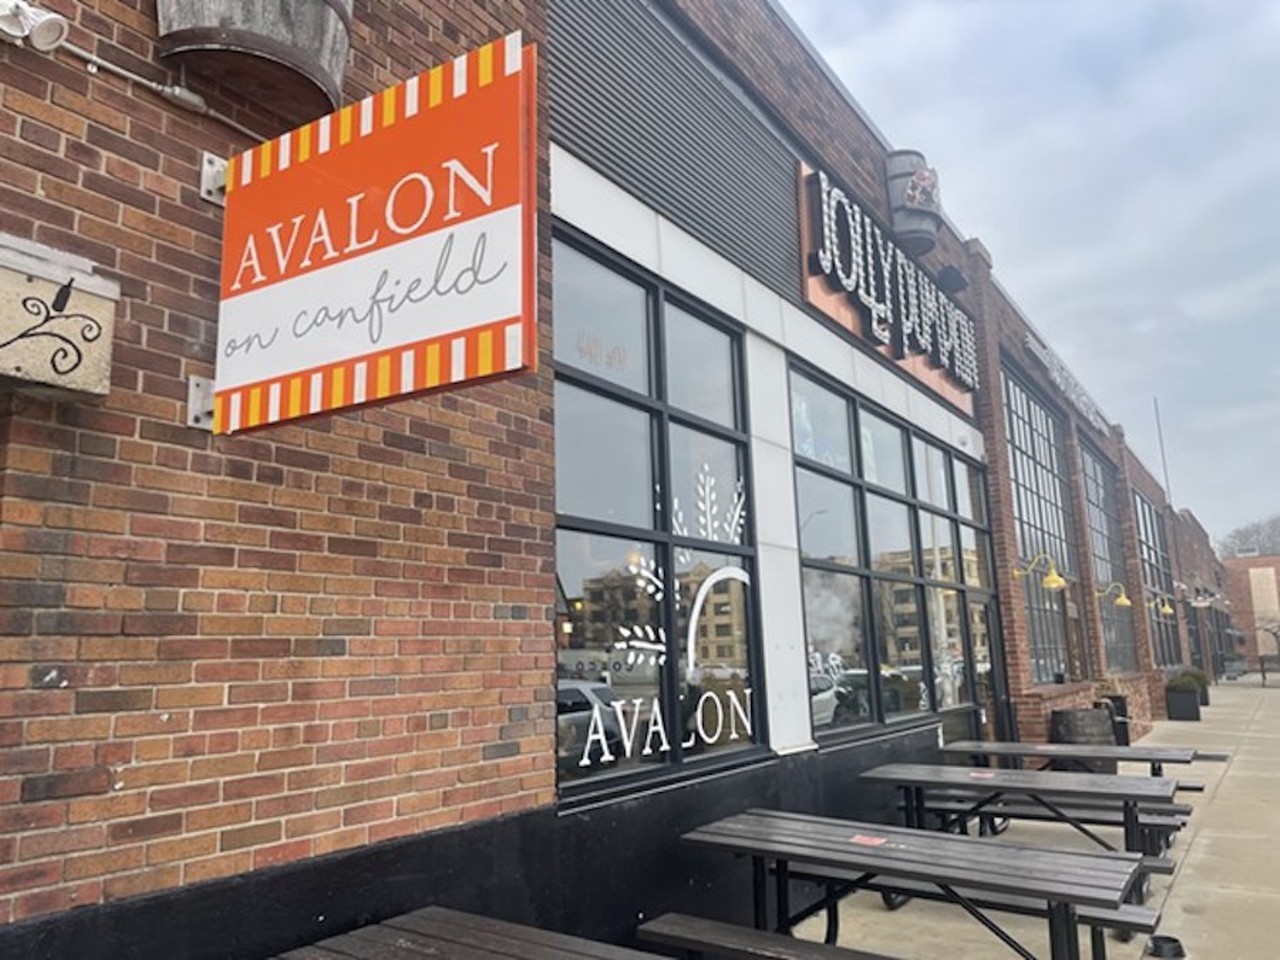 Avalon Bakery
Multiple locations, including  441 W. Canfield St.; 313-262-6115; avaloninternationalbreads.net
For 25 years, Jackie Victor has operated Avalon International Breads. Just recently, she opened a new bakery inside Midtown’s Jolly Pumpkin to lines nearly out the door. 
